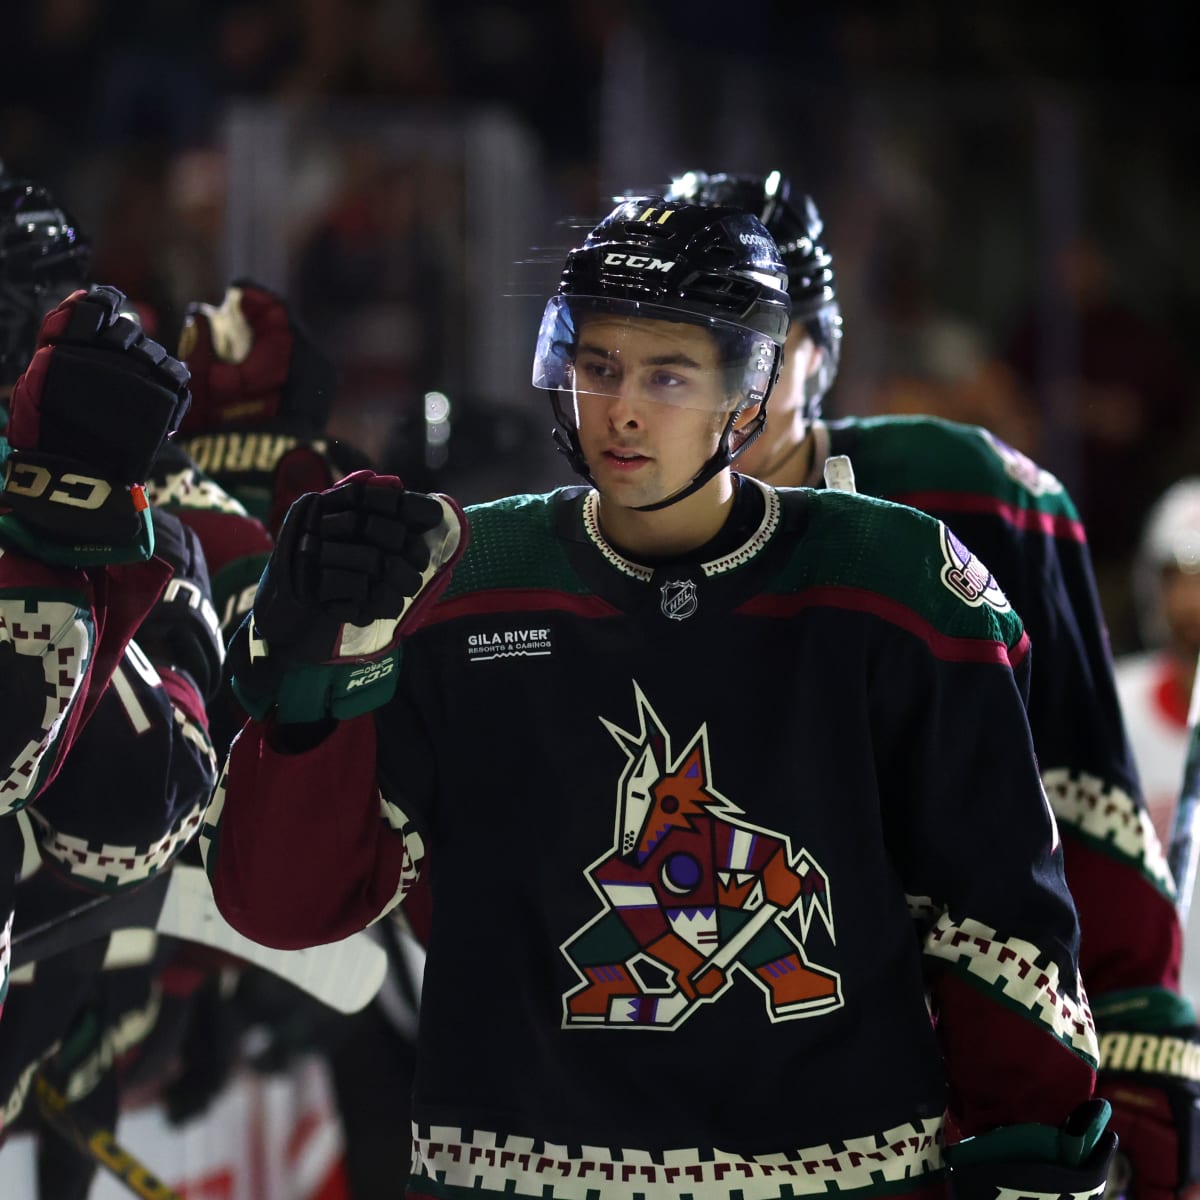 Notable Prospects to Watch for at Coyotes Development Camp